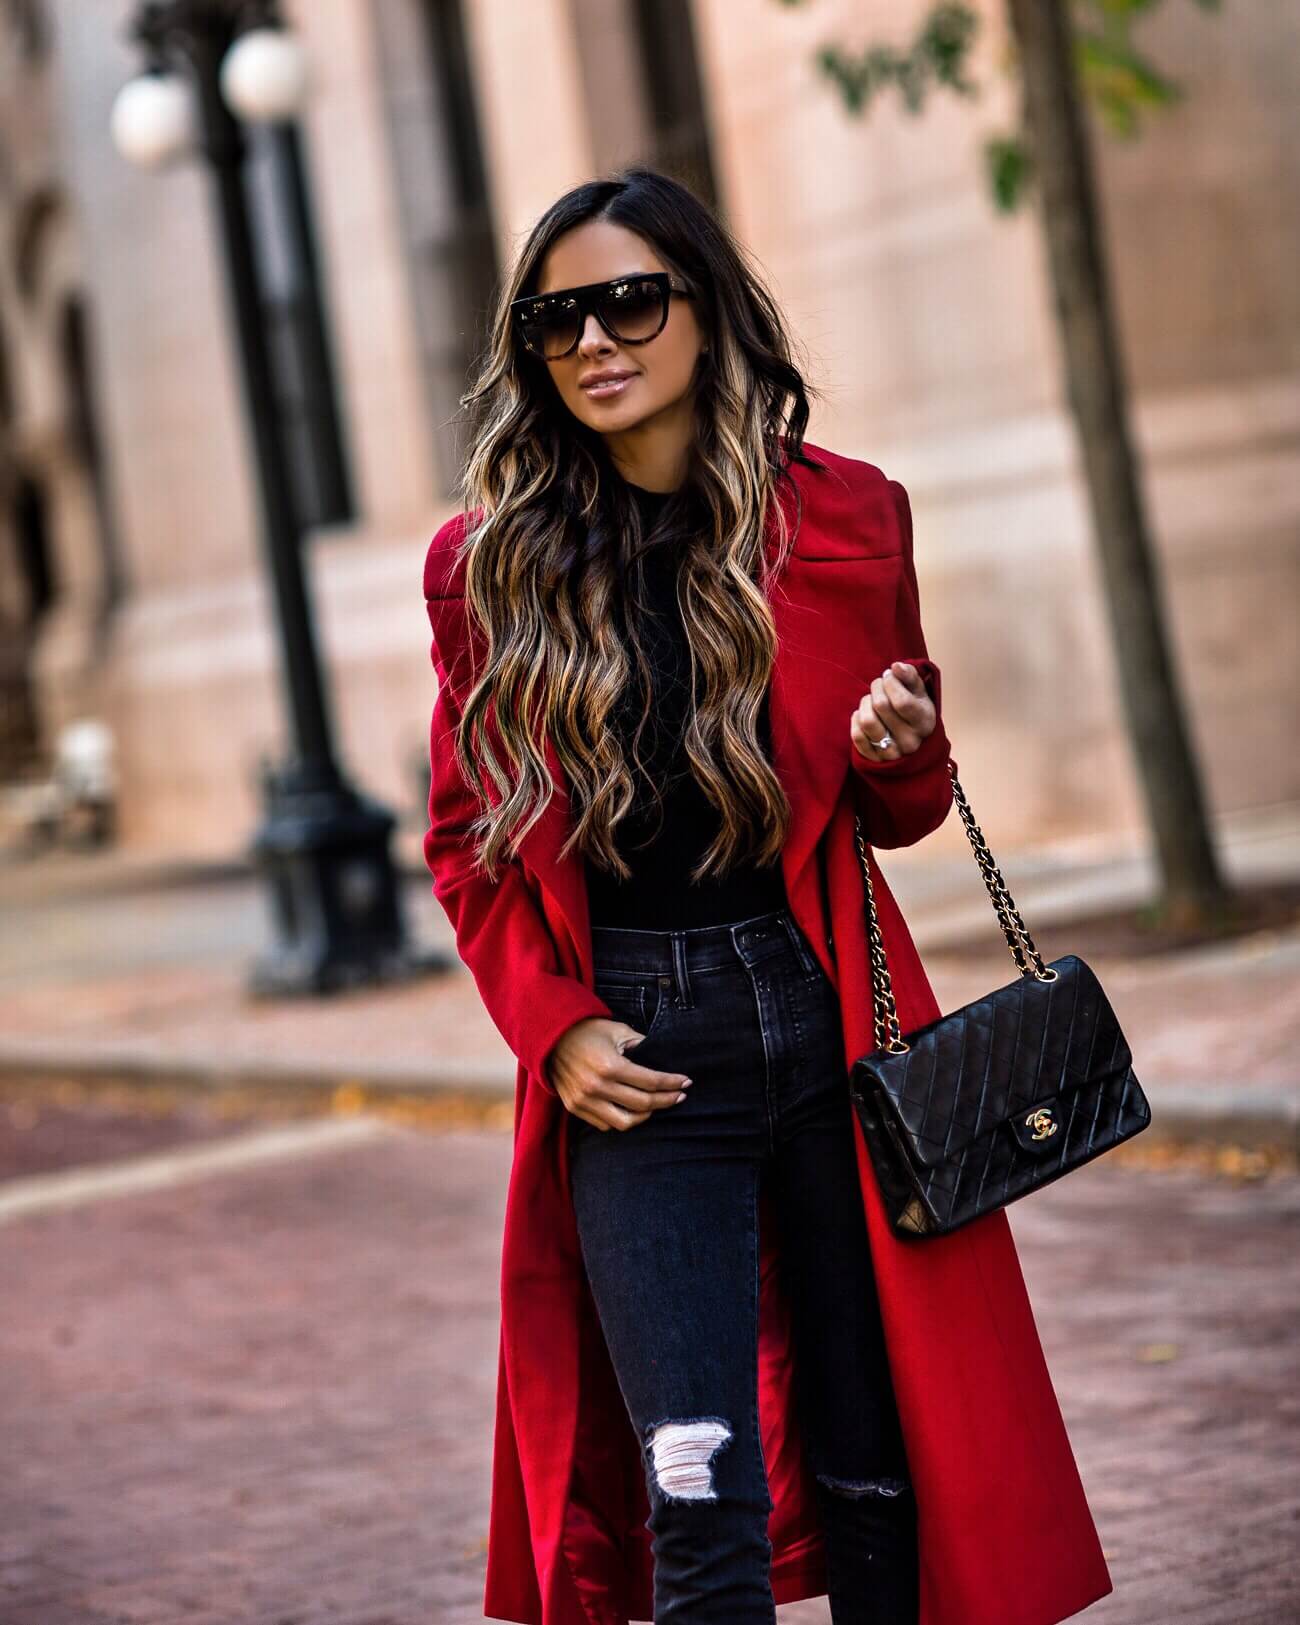 fashion blogger mia mia mine wearing a red coat by kendall + kylie from bloomingdale's